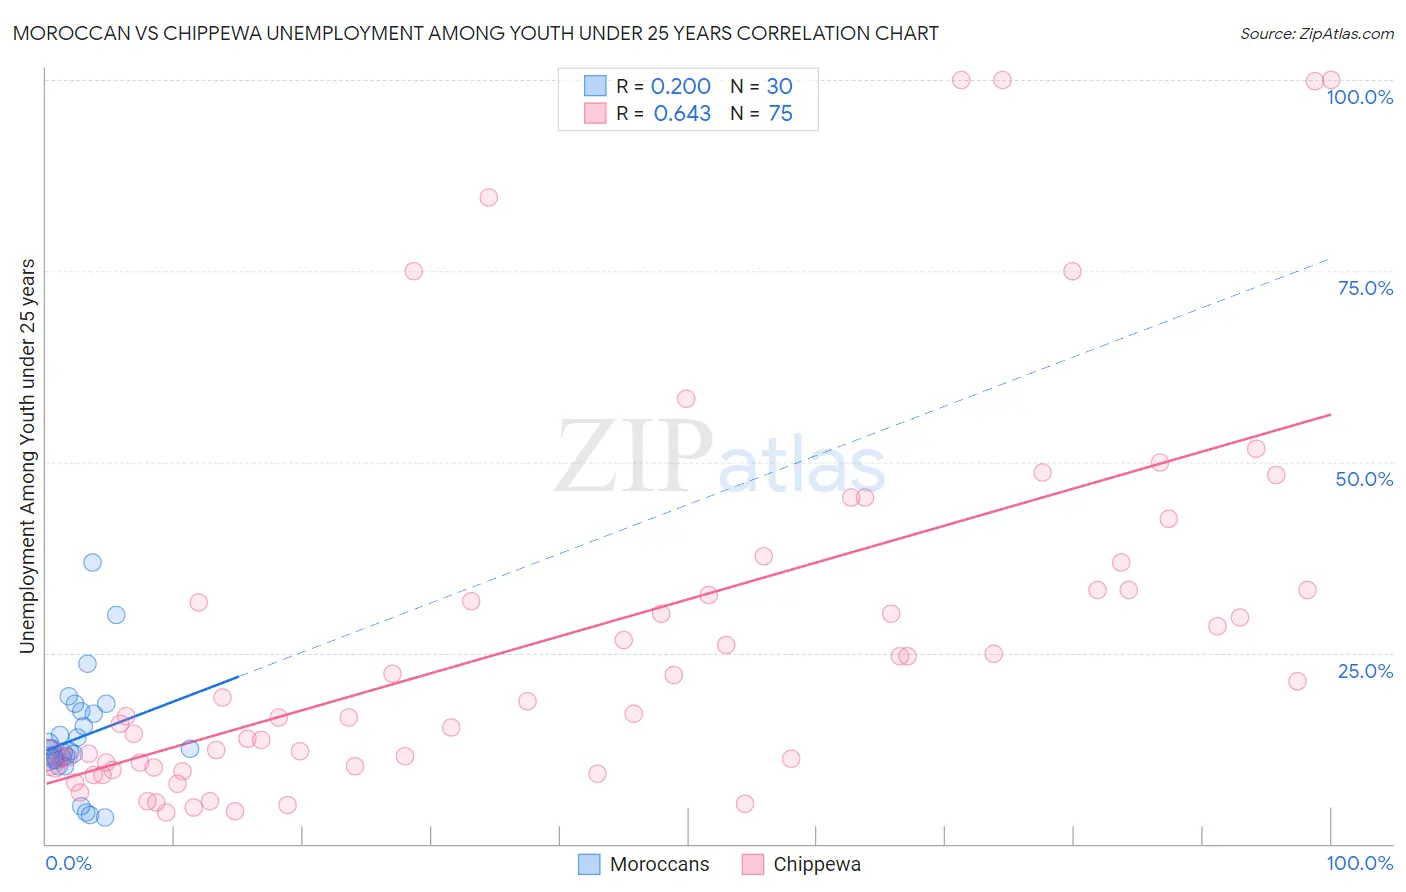 Moroccan vs Chippewa Unemployment Among Youth under 25 years